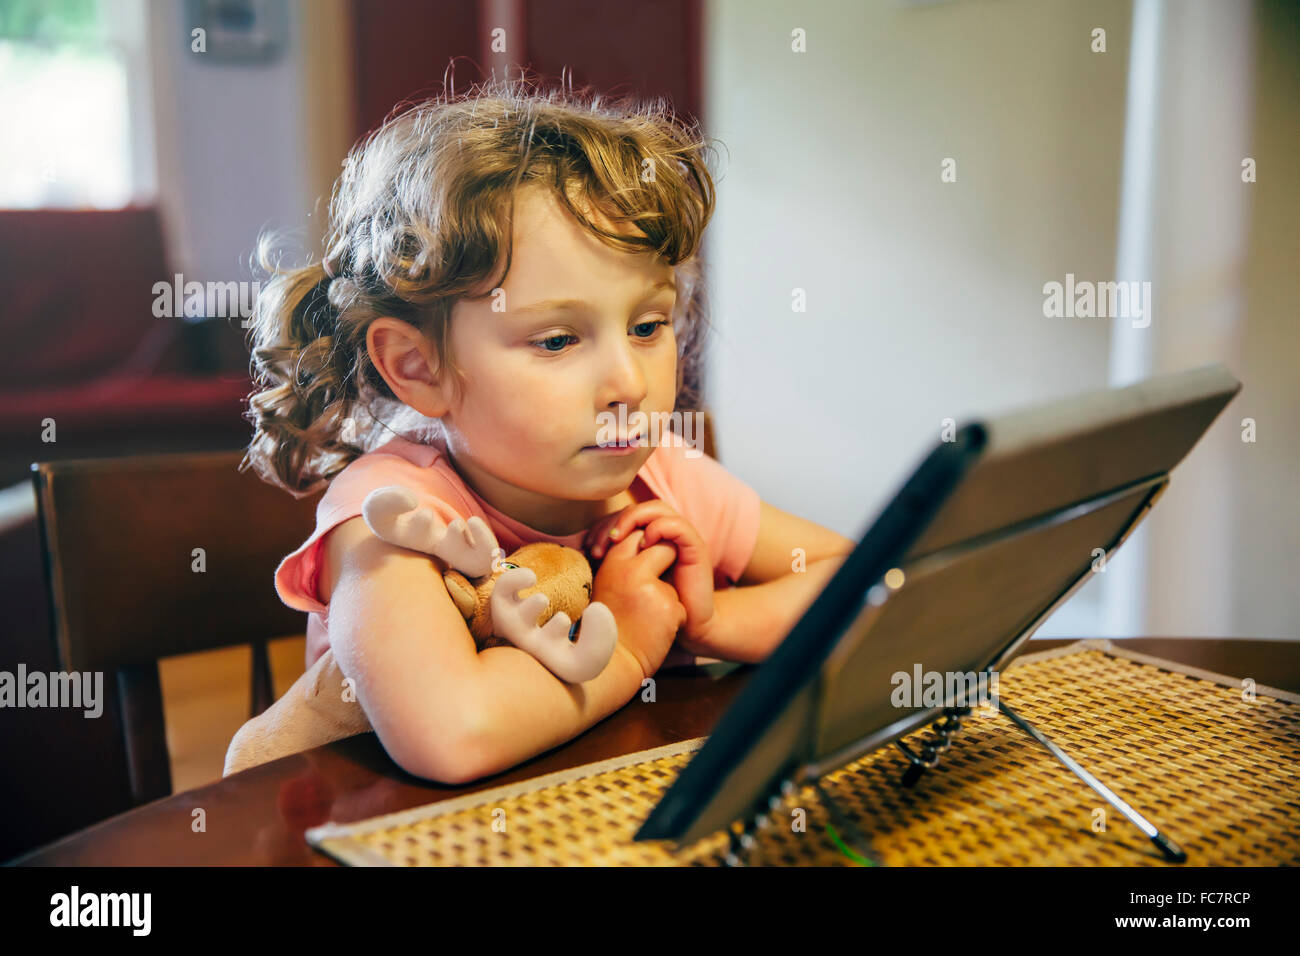 Caucasian girl watching digital tablet Banque D'Images